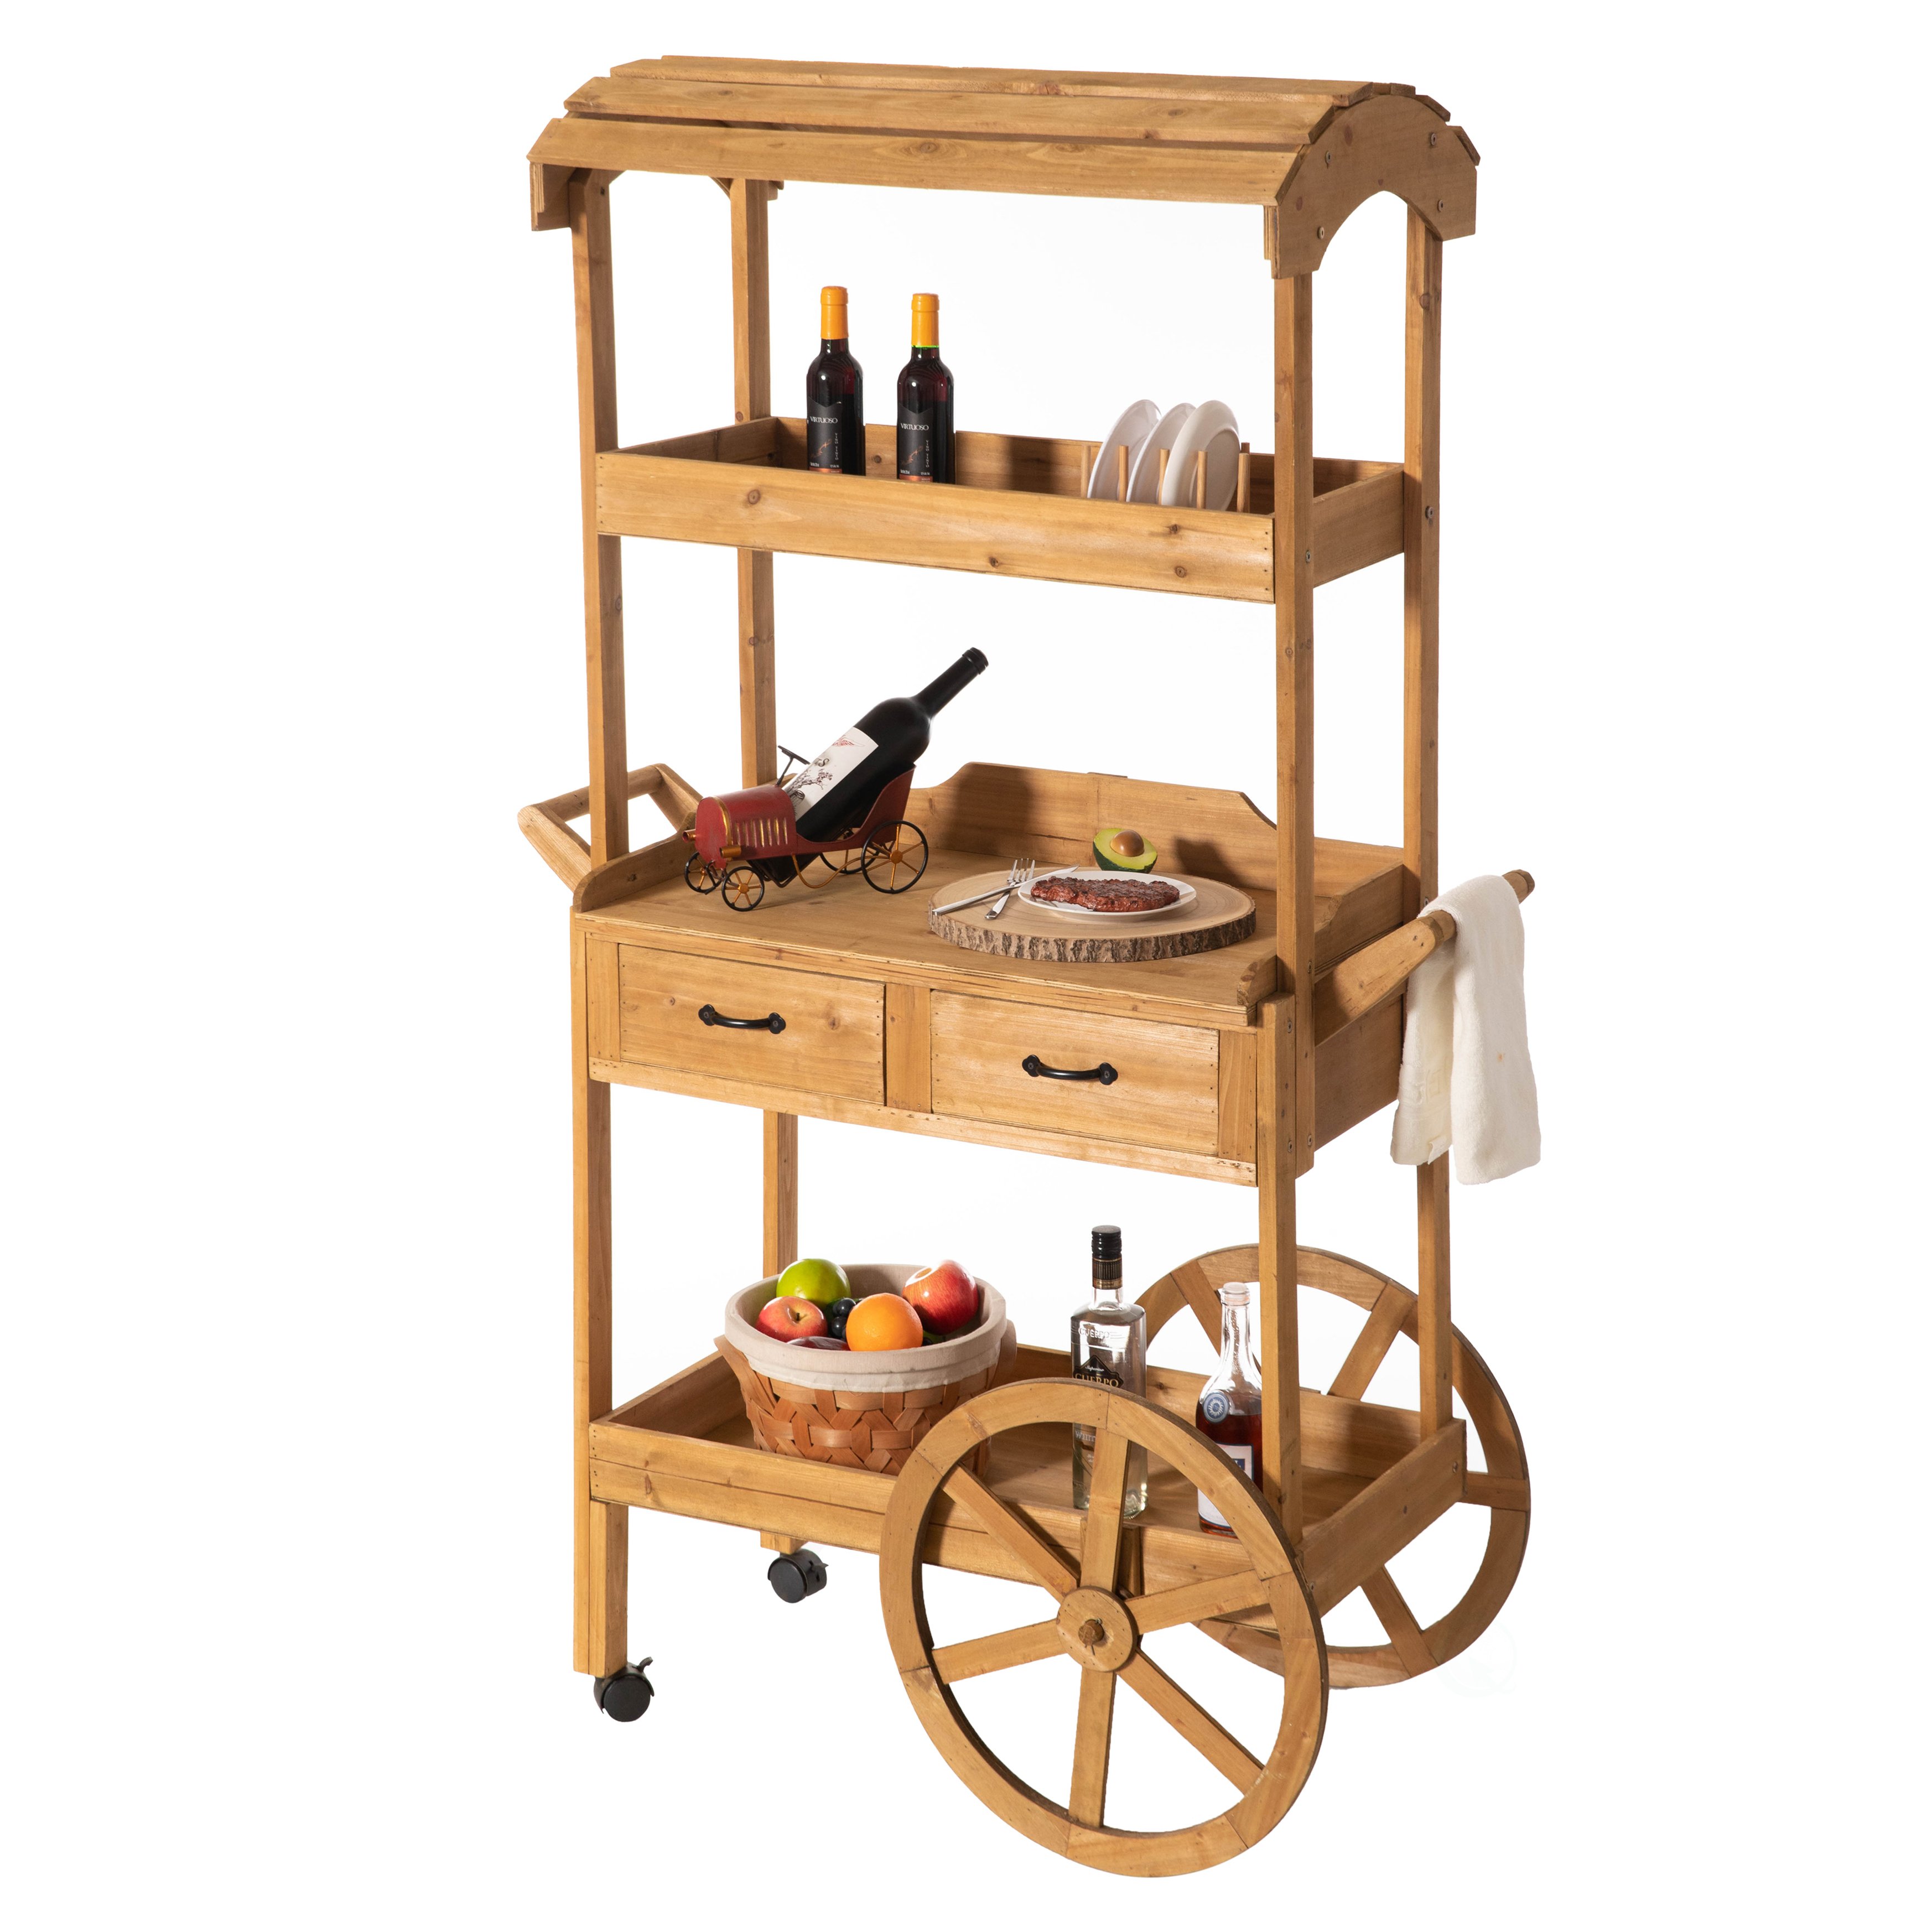 Large Wooden Display Rolling Table With Drawers And Wheels 3 Tier With Shelves For Food And More